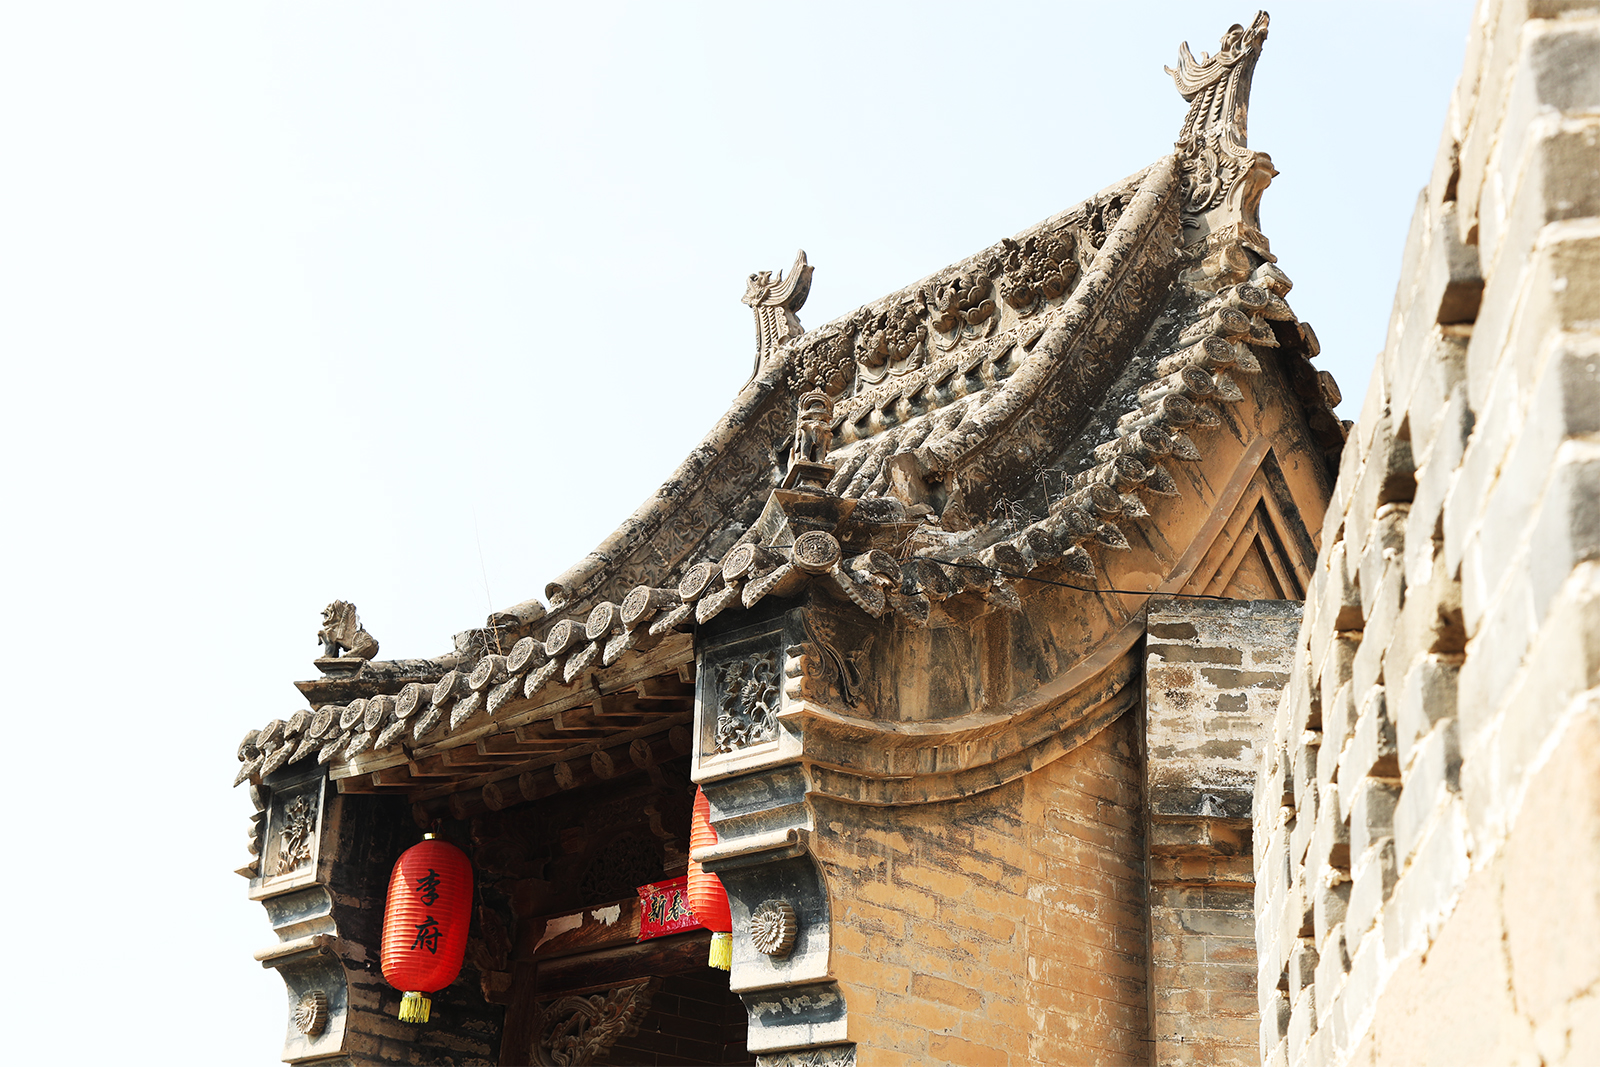 The roofs of houses in Lijiashan Village feature elaborate stone carvings. /CGTN